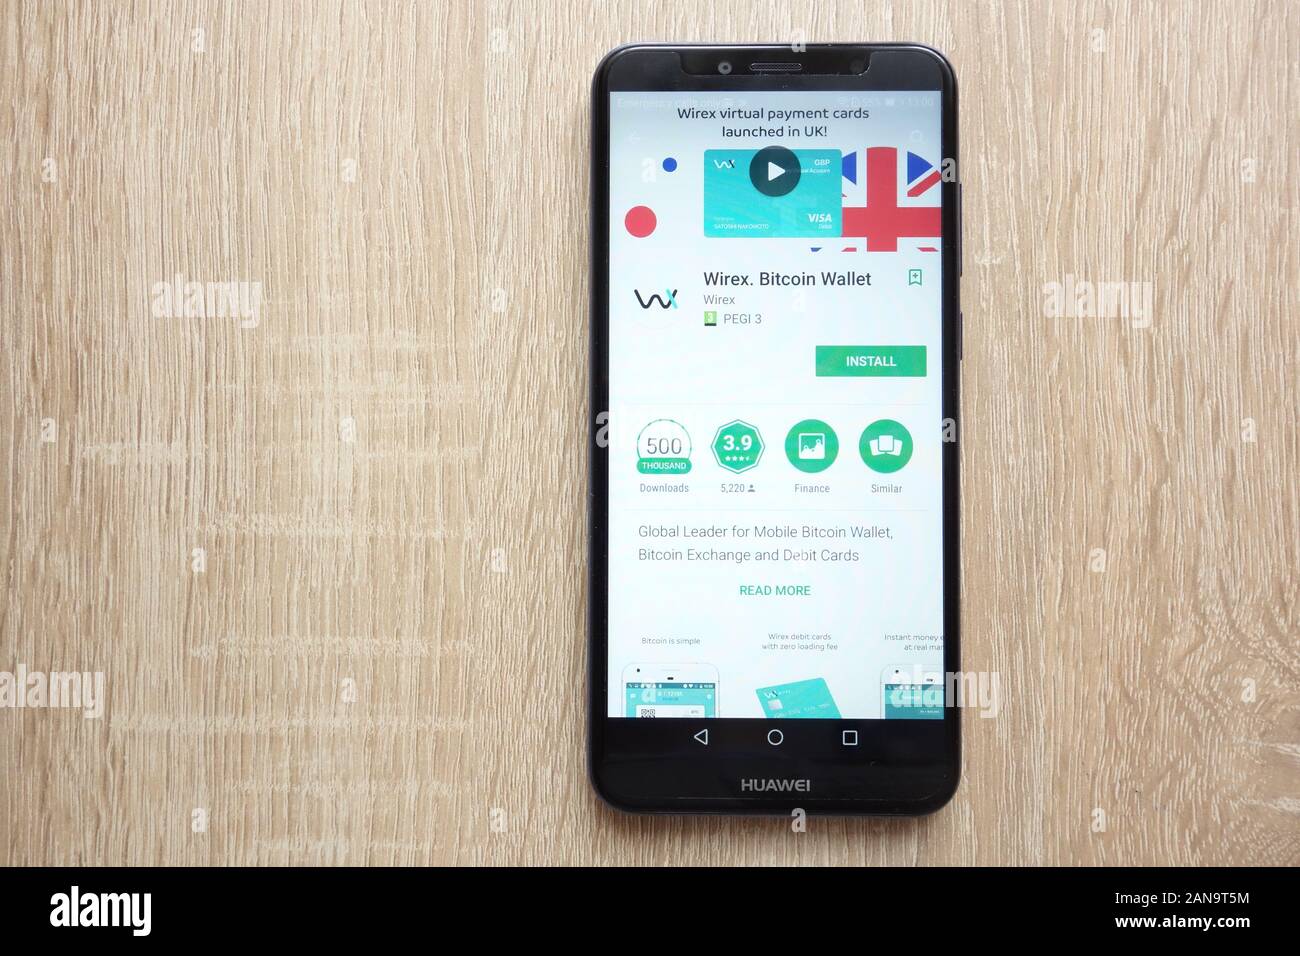 Wirex. Bitcoin Wallet app on Google Play Store website displayed